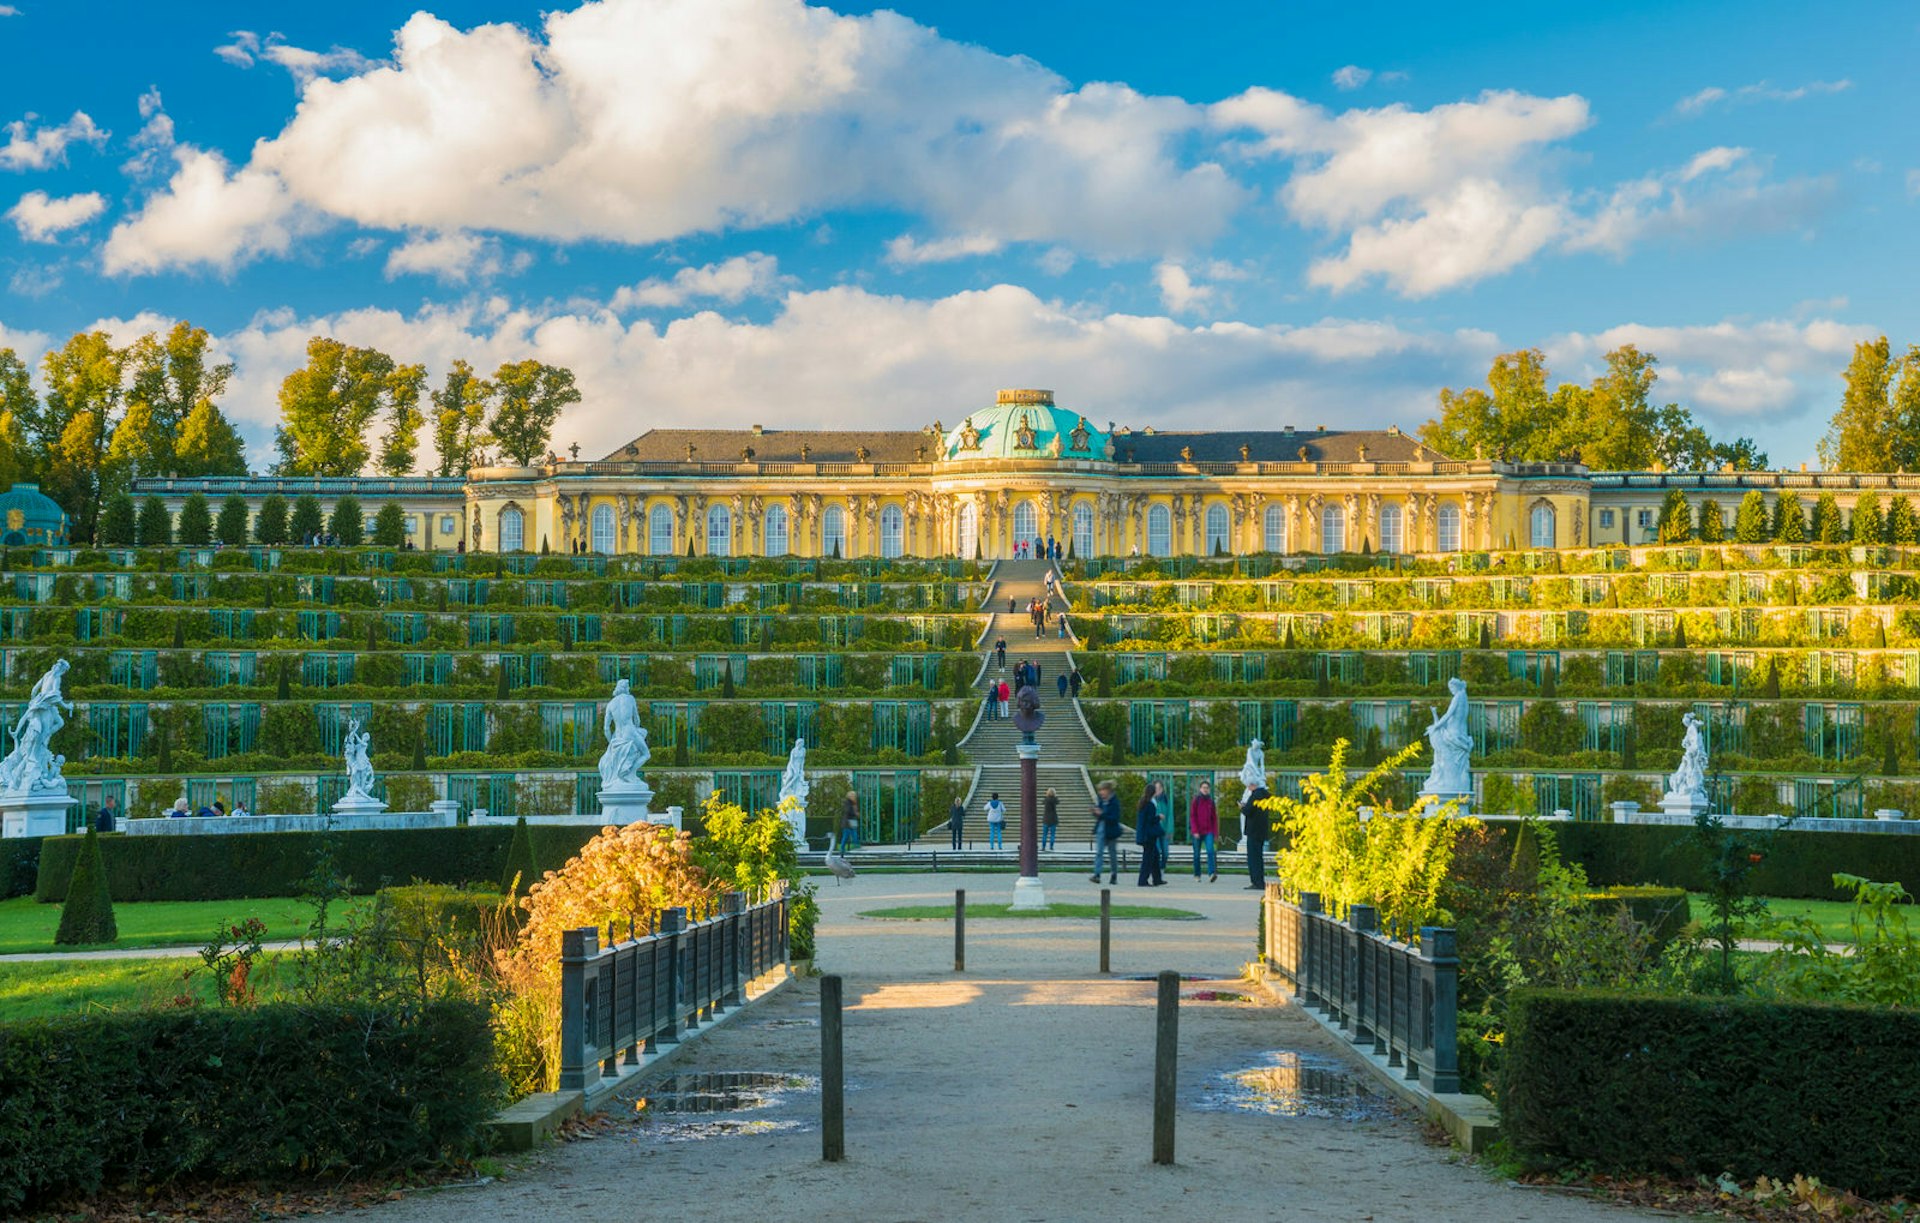 Berlin day trips - Sanssoucci Palace in Potsdam, which can be visited as a day trip from Berlin. The palace sits above a long flight of stairs which are flanked by statues and greenery. There is a copper-domed roof above the yellow walls and many curved windows. 